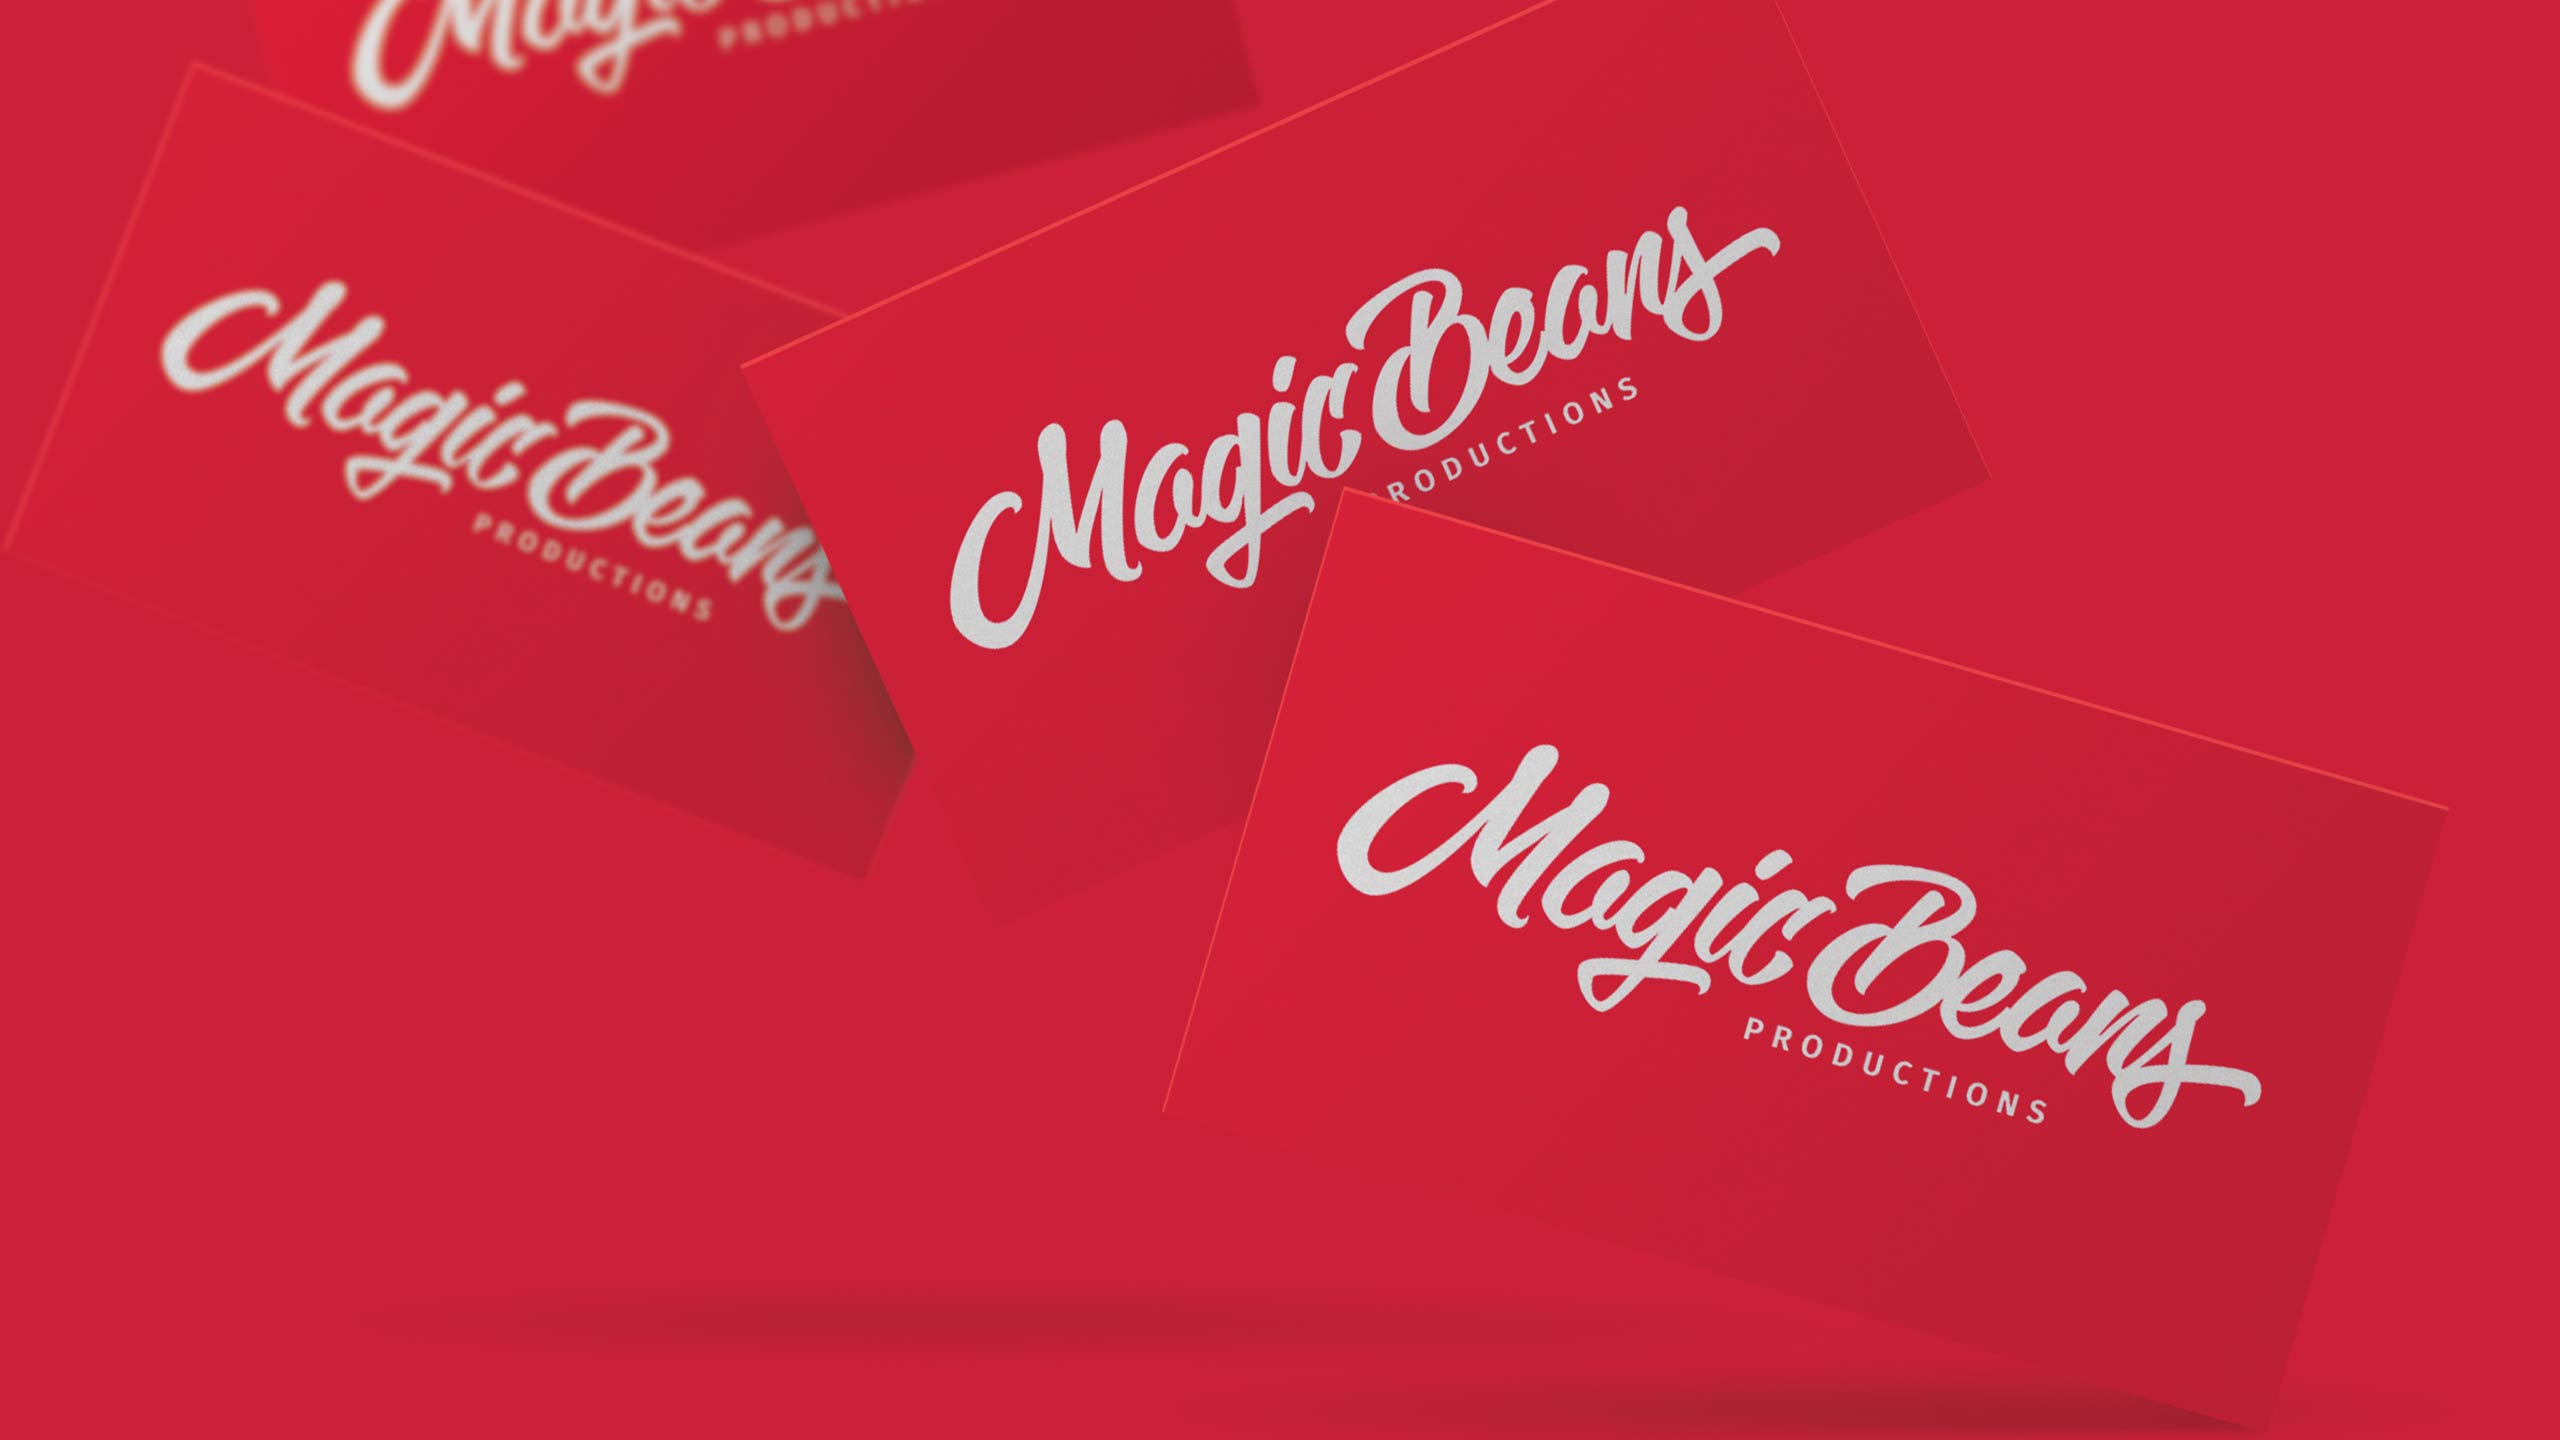 Business cards design for Magic Beans